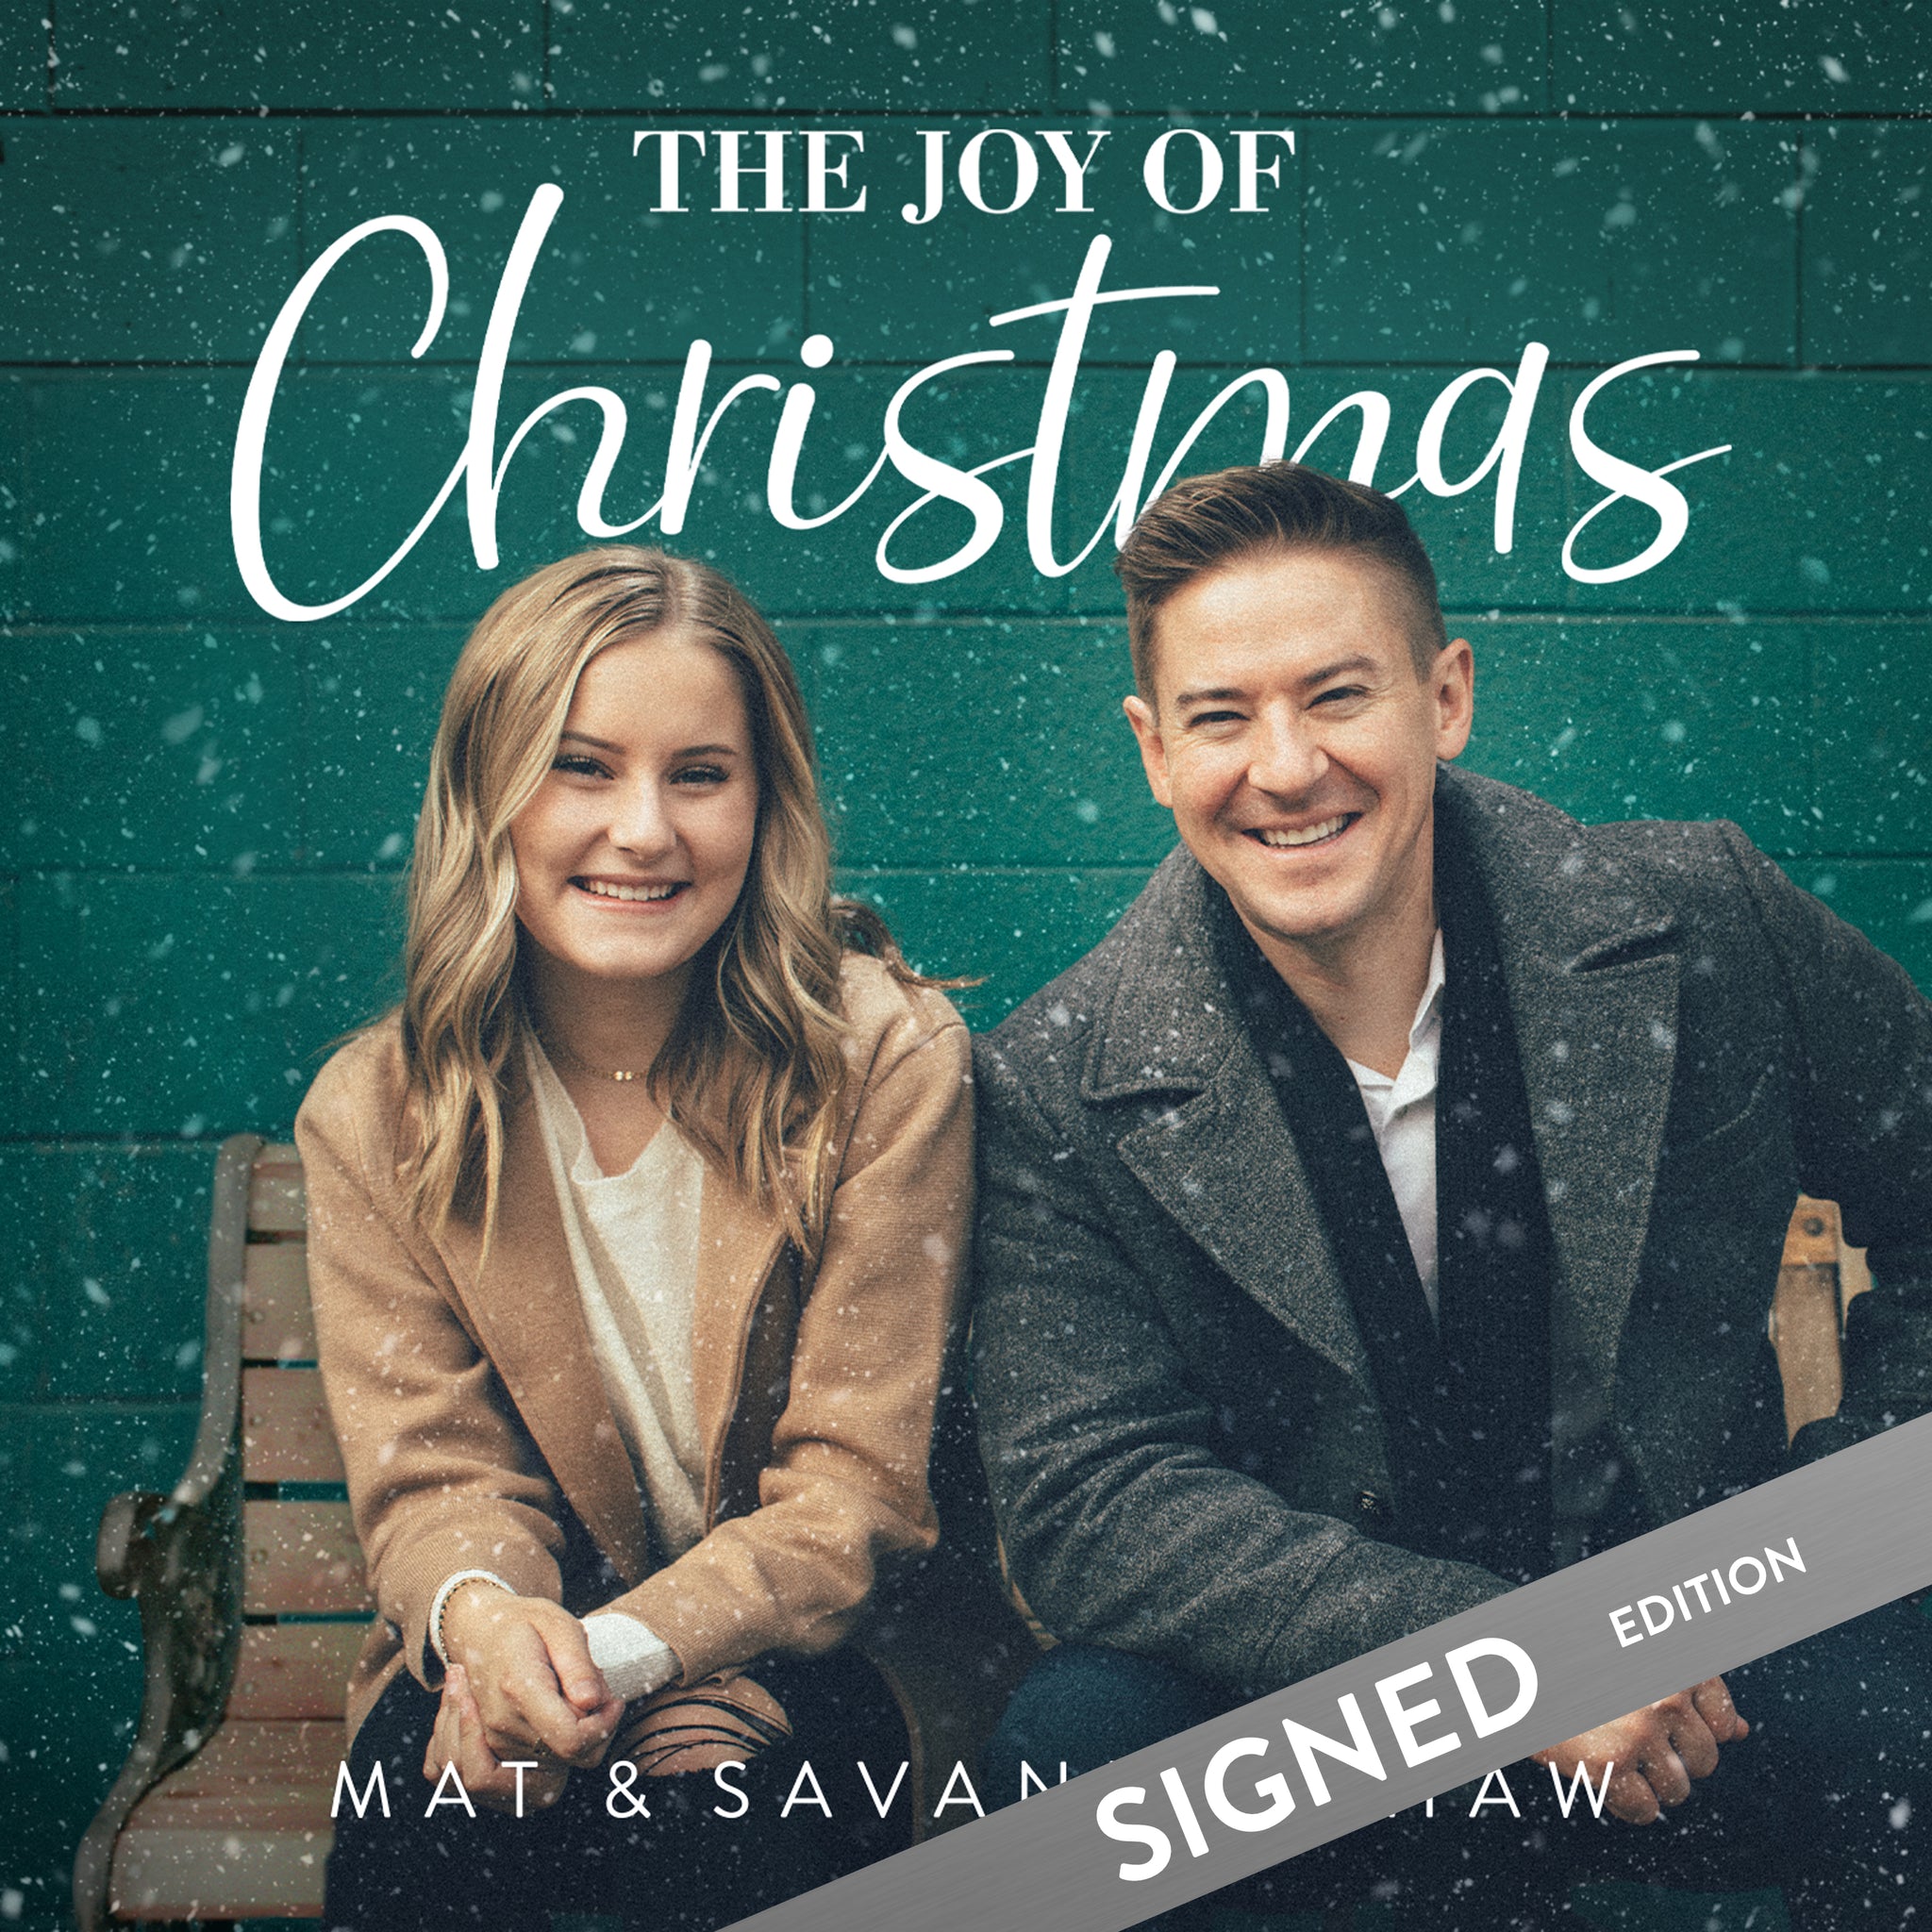 The Joy of Christmas - CD *SPECIAL SIGNED EDITION*